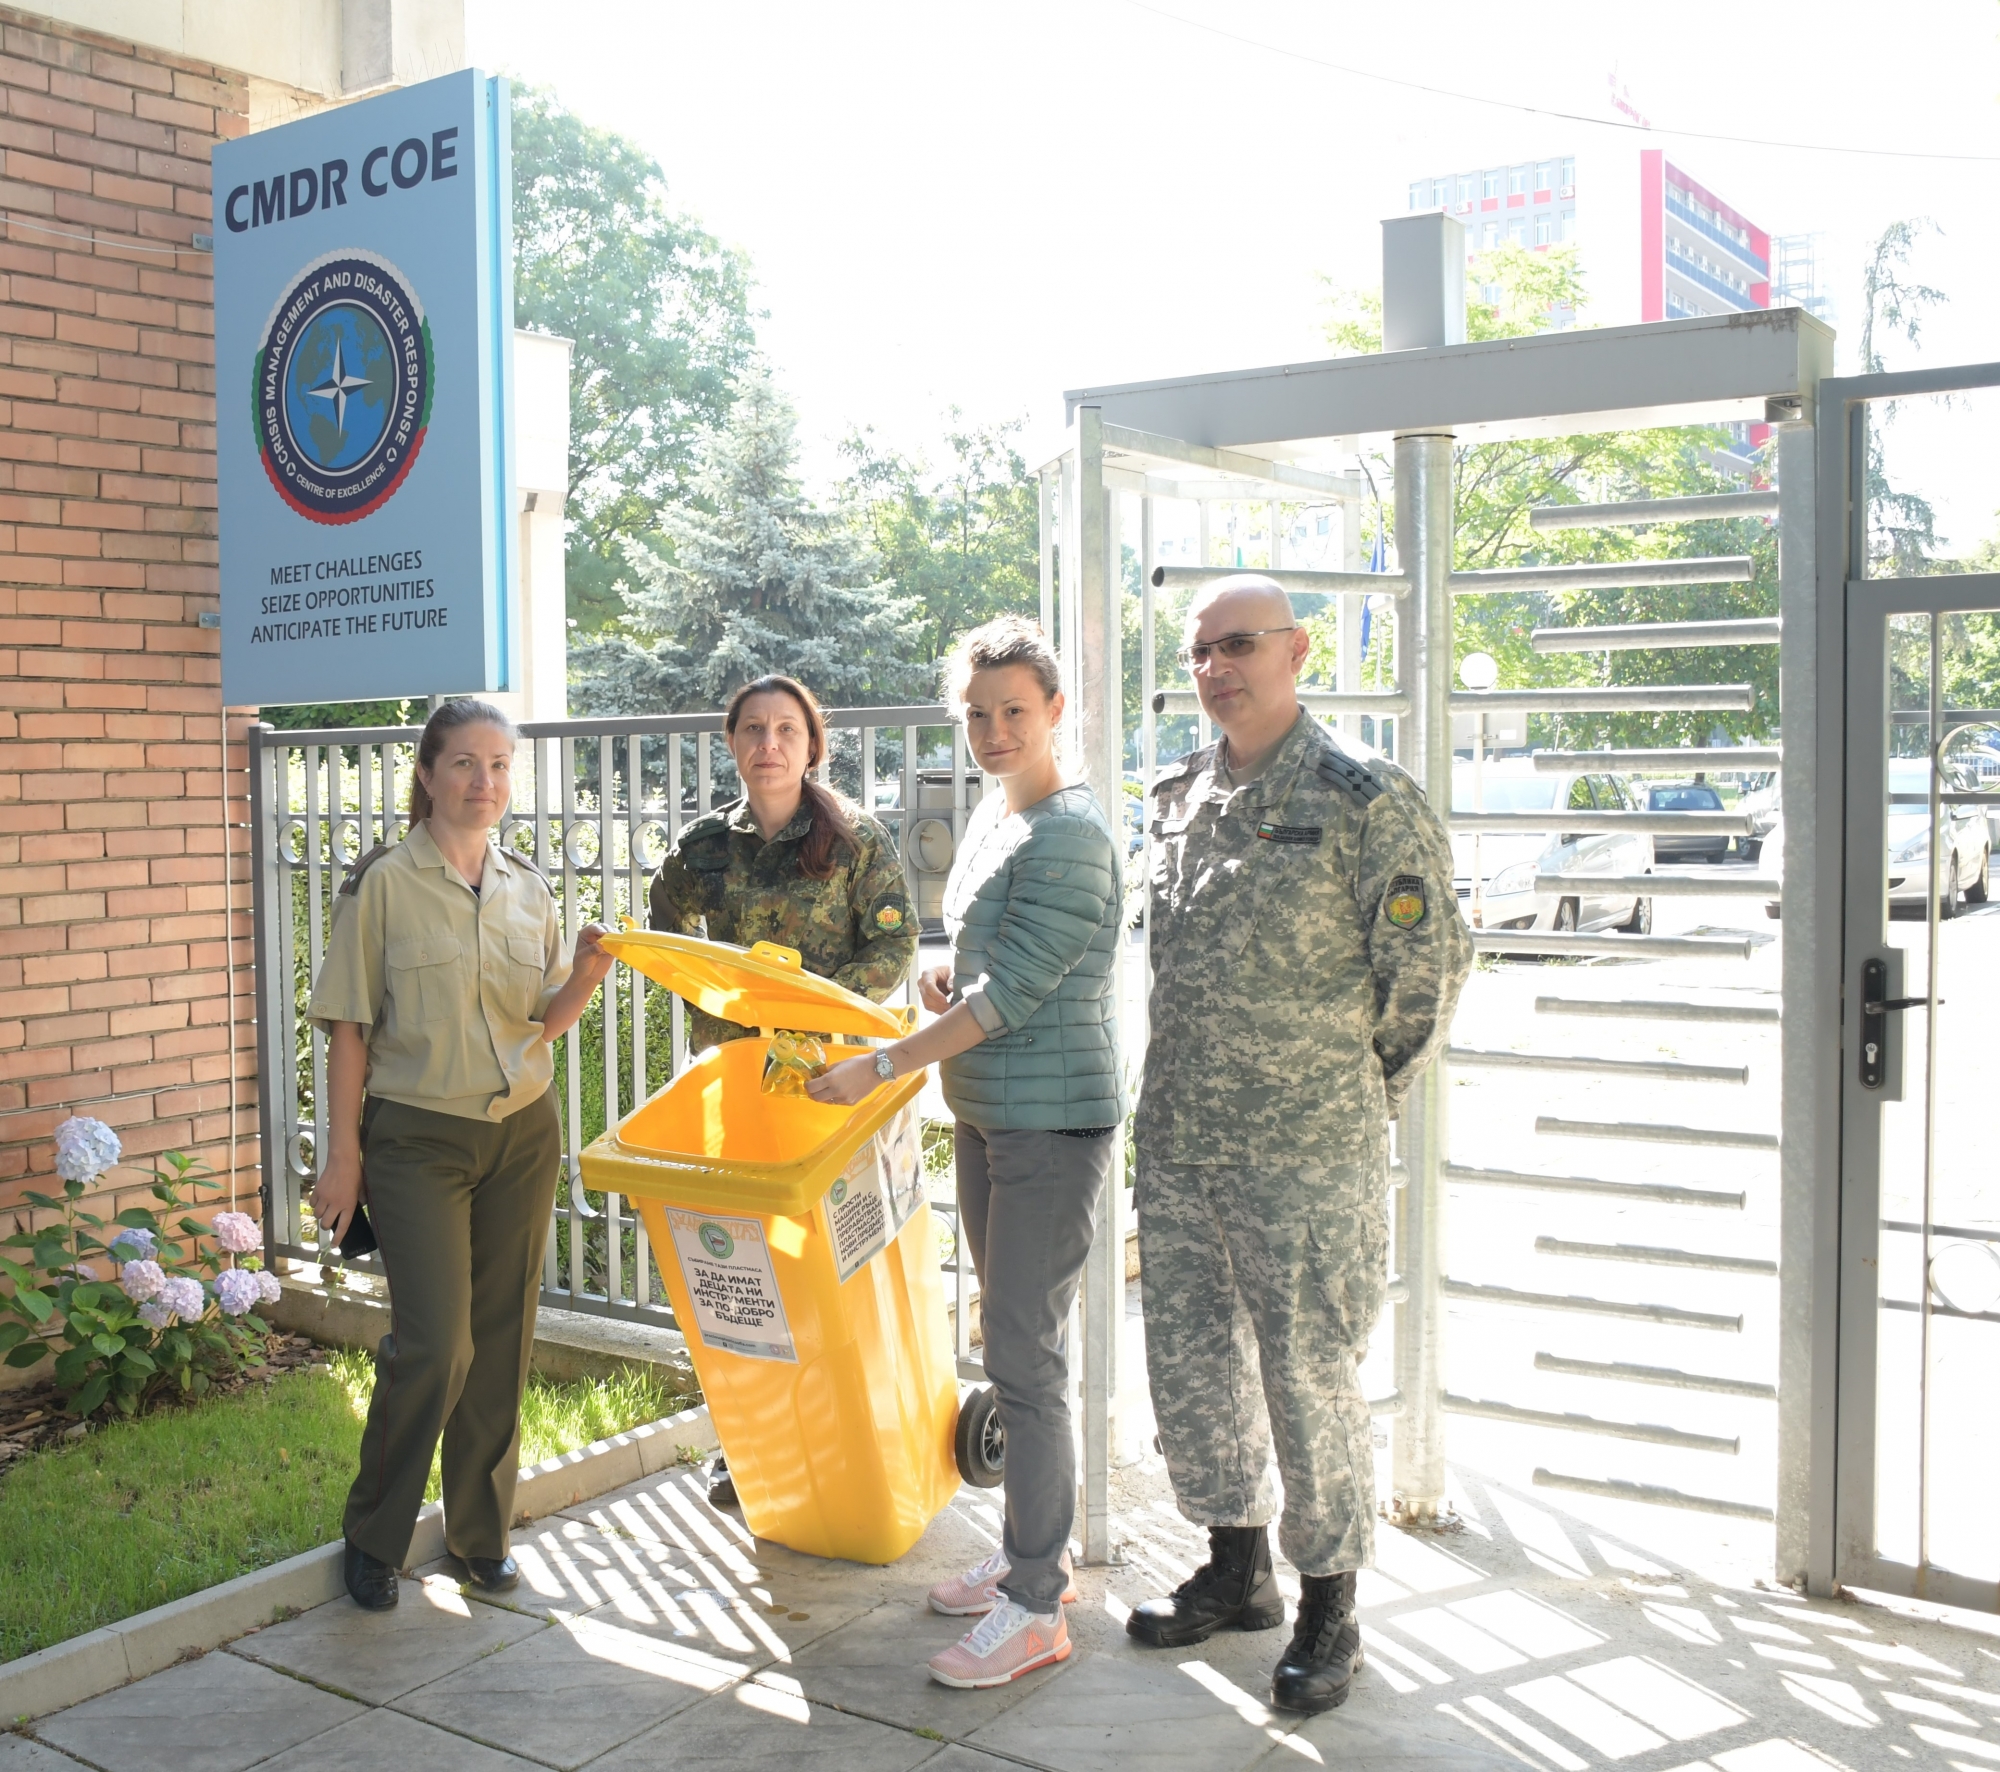 New life for used plastic – the CMDR COE launches a recycling initiative